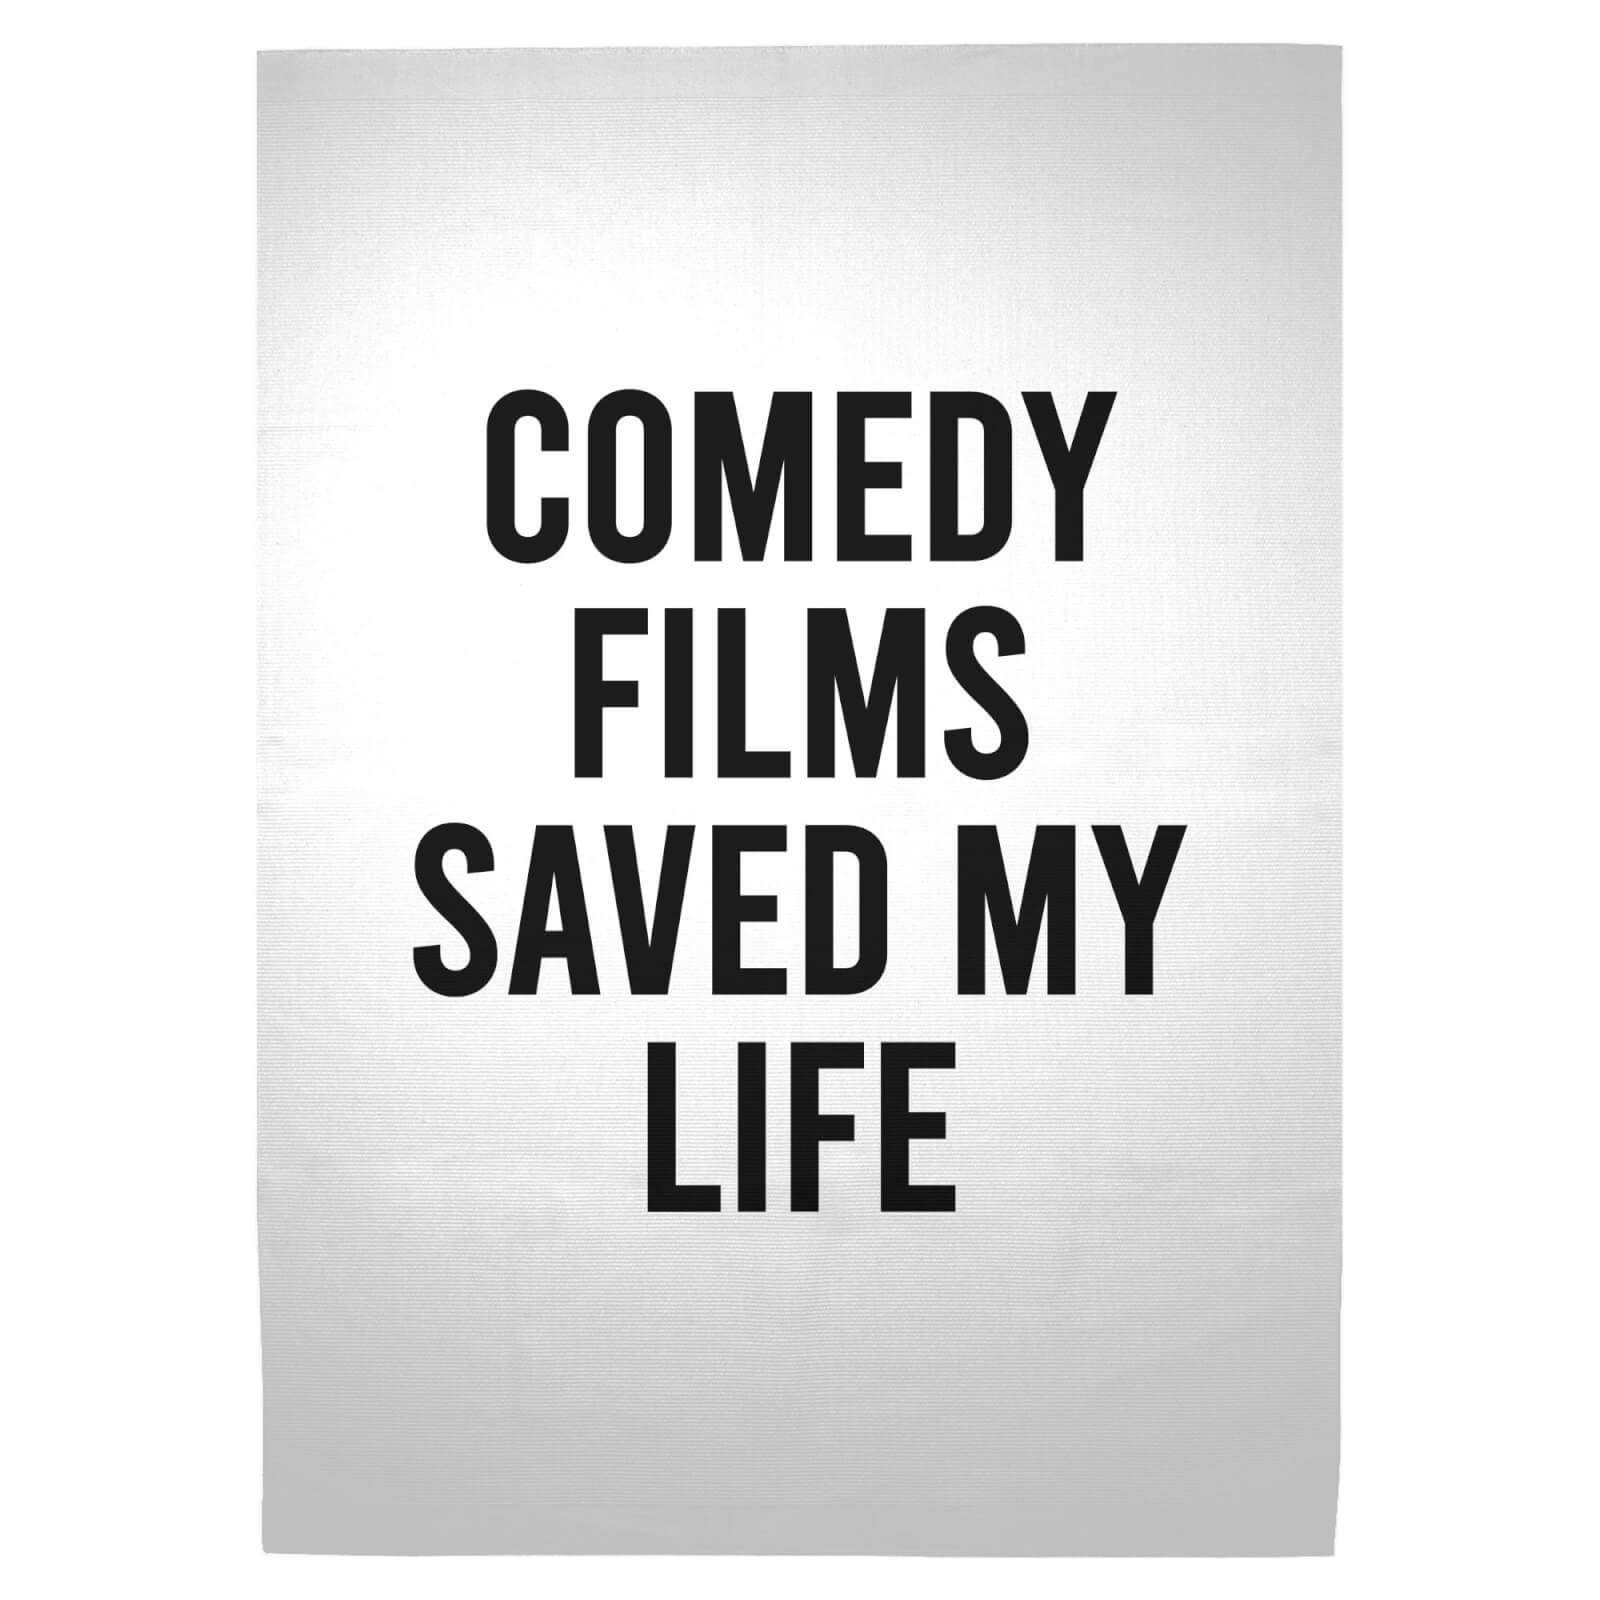 Comedy Films Saved My Life Woven Rug - Large